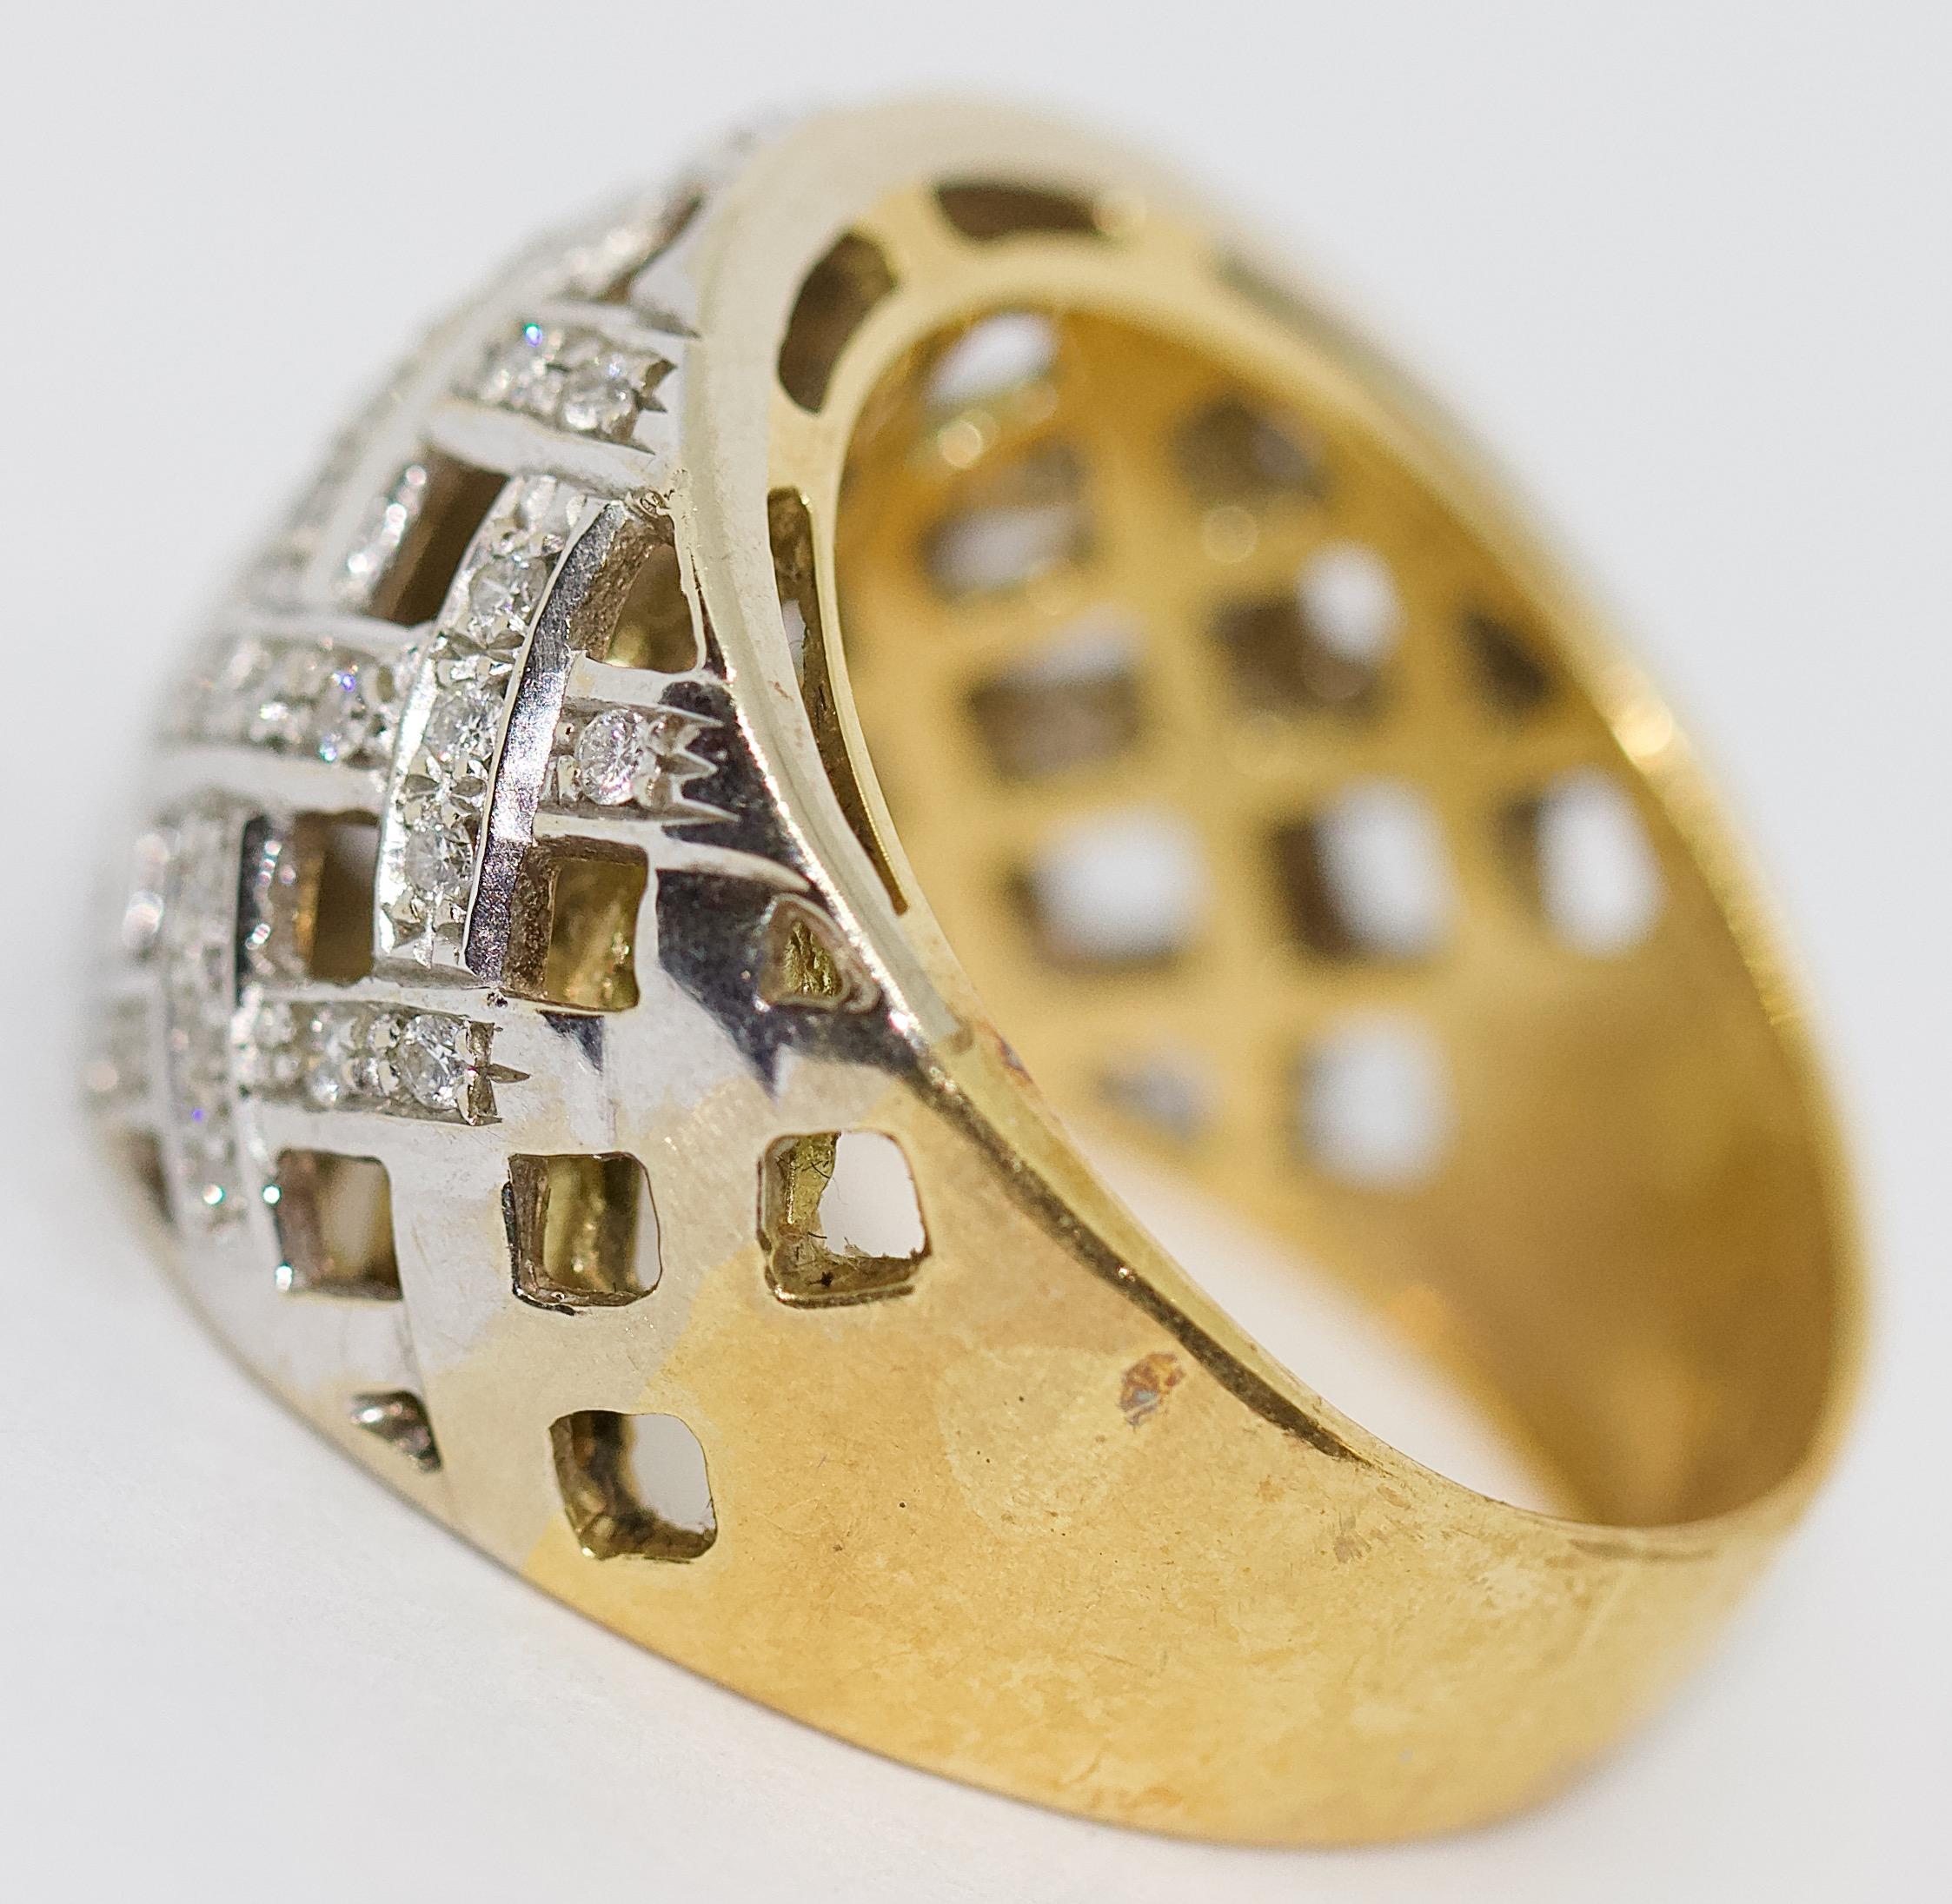 Dome Ring, 18K Gold with Diamonds.

Ring is hallmarked.
US ring size: 8

Including certificate of authenticity.